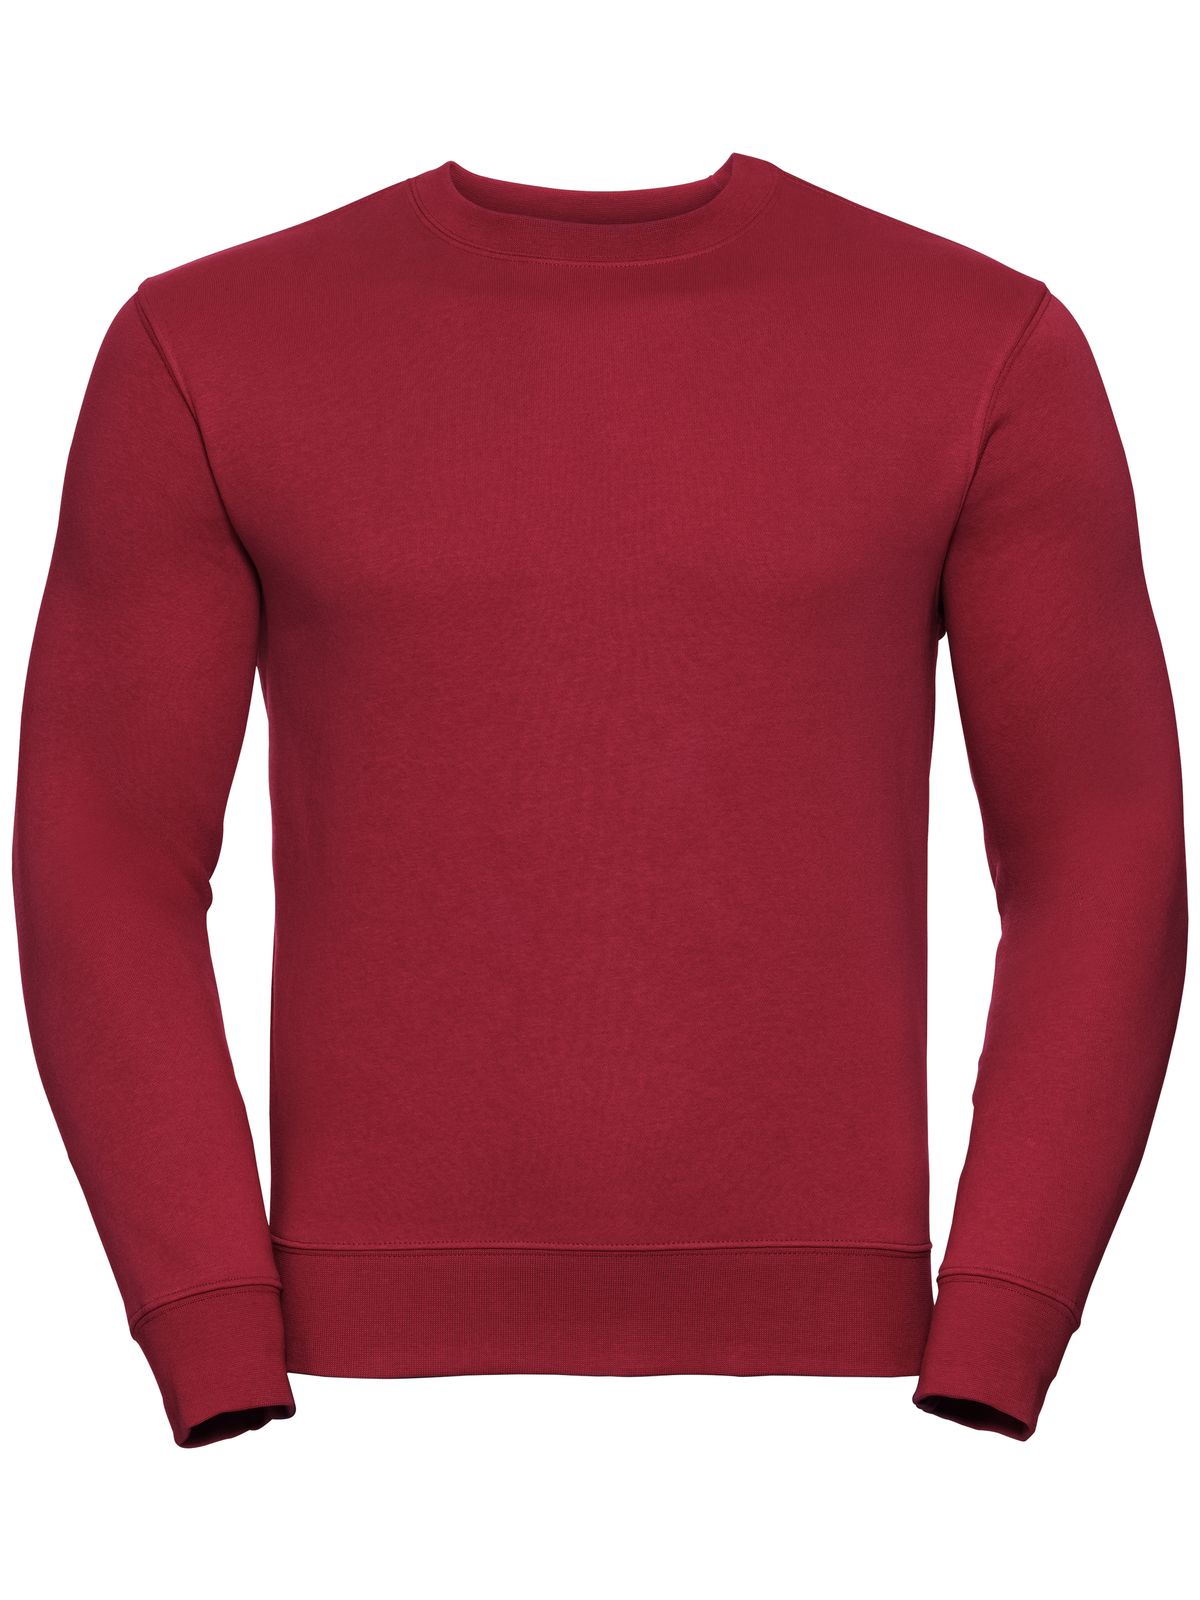 adults-authentic-sweat-classic-red.webp